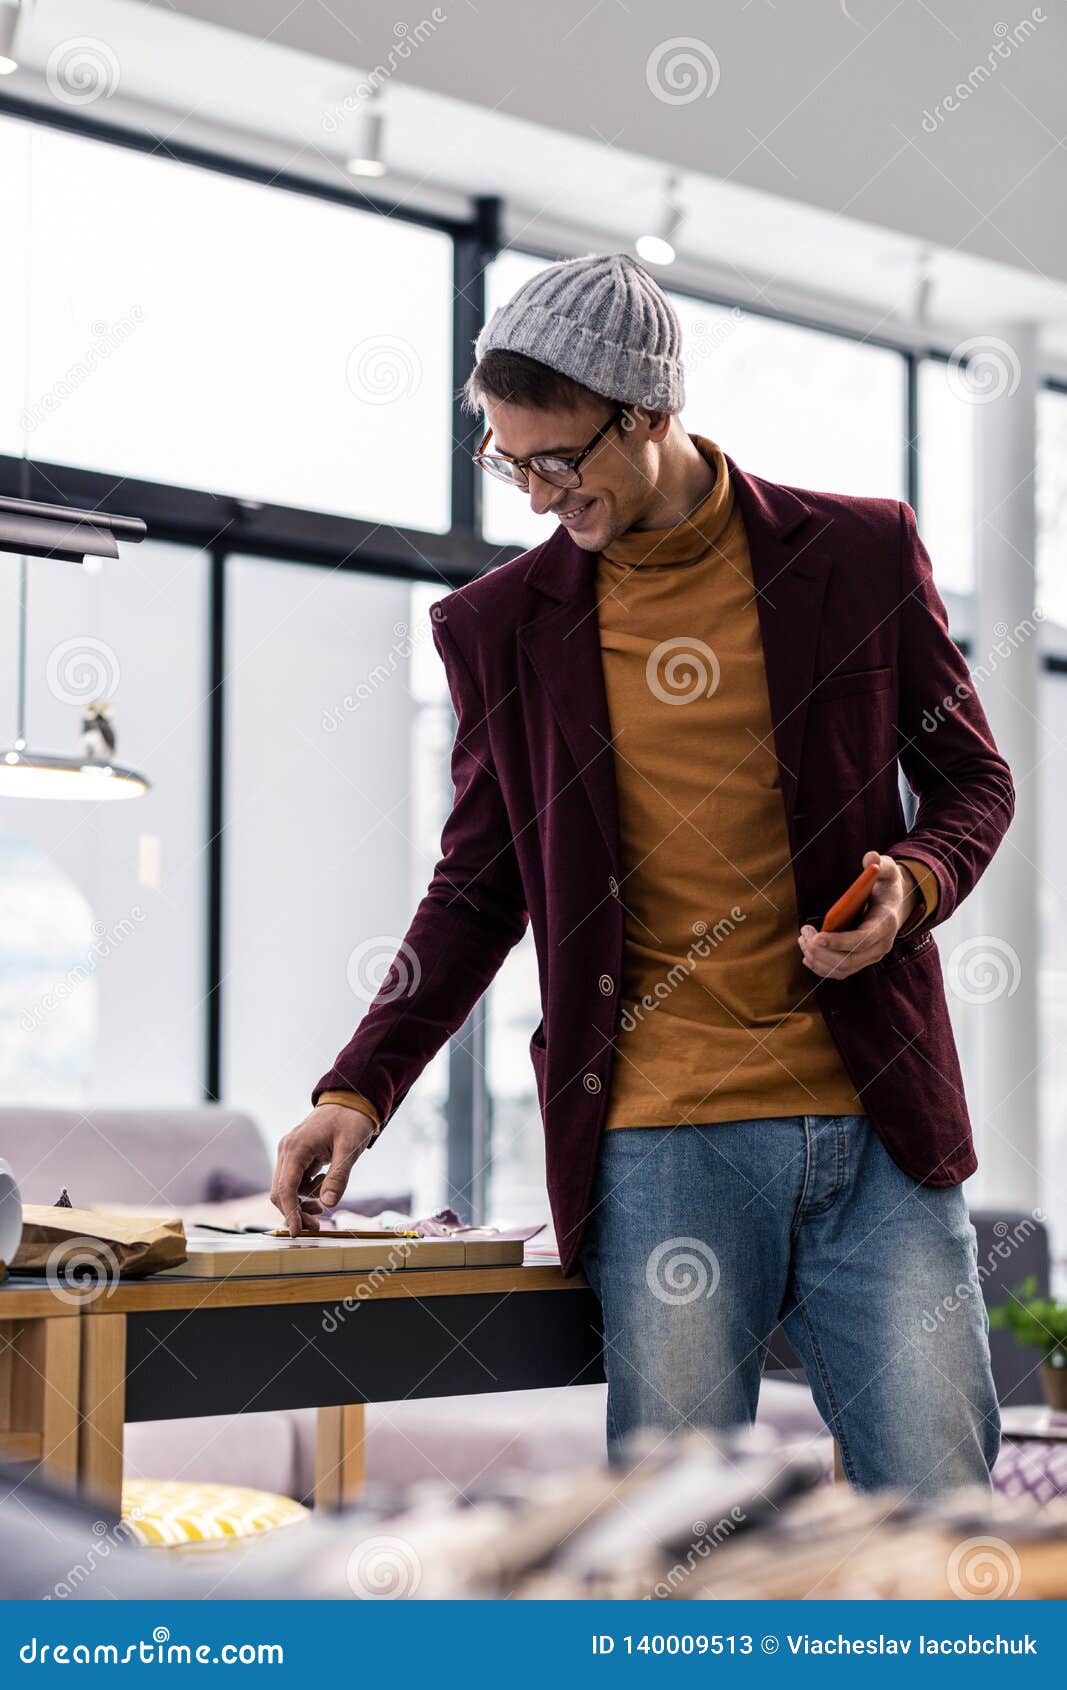 well-groomed trendy worn manager smilingly pointing at samples at desk